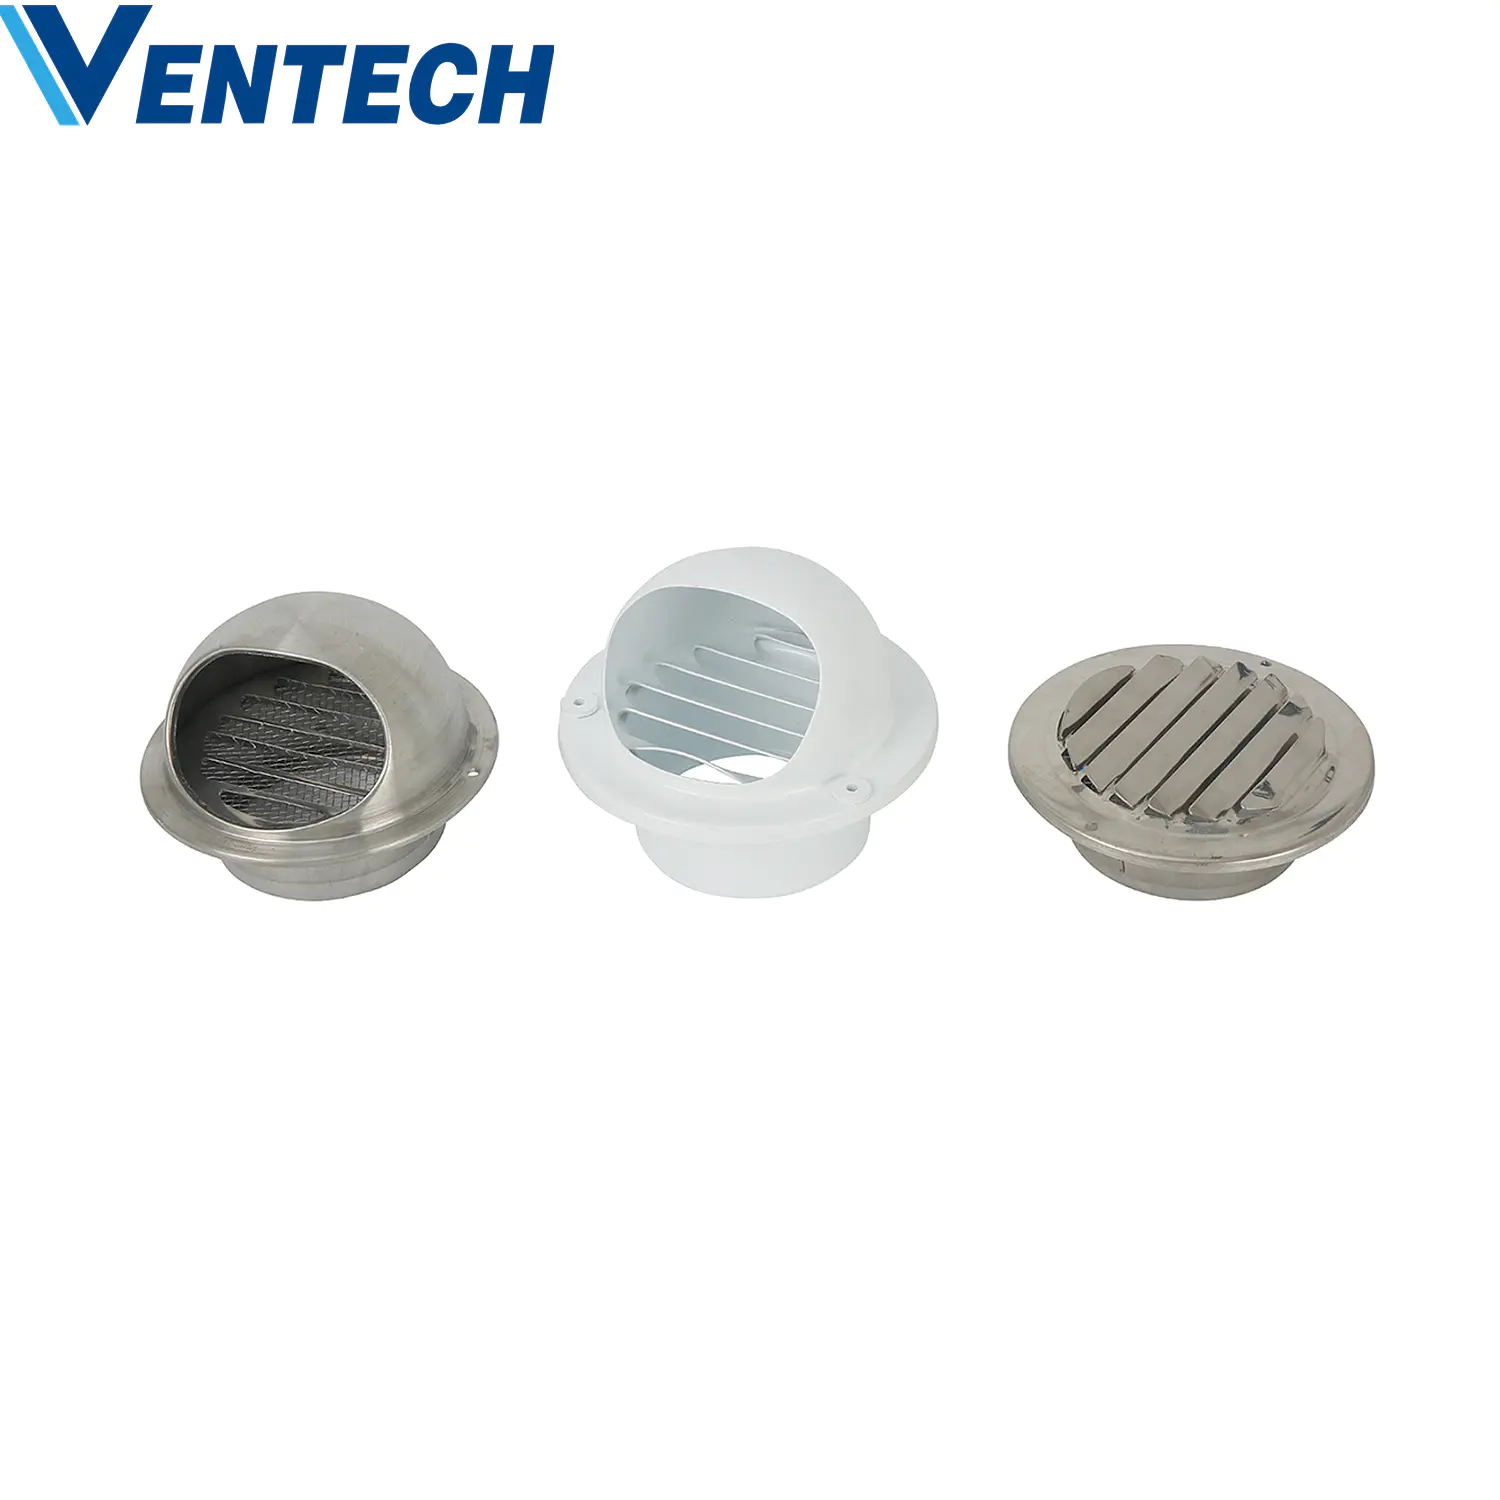 Hvac Wall Ventilation Exhaust Air Conditioner Adjustable Vent Duct Louvers Stainless Steel Round Waterproof Weather Louvers